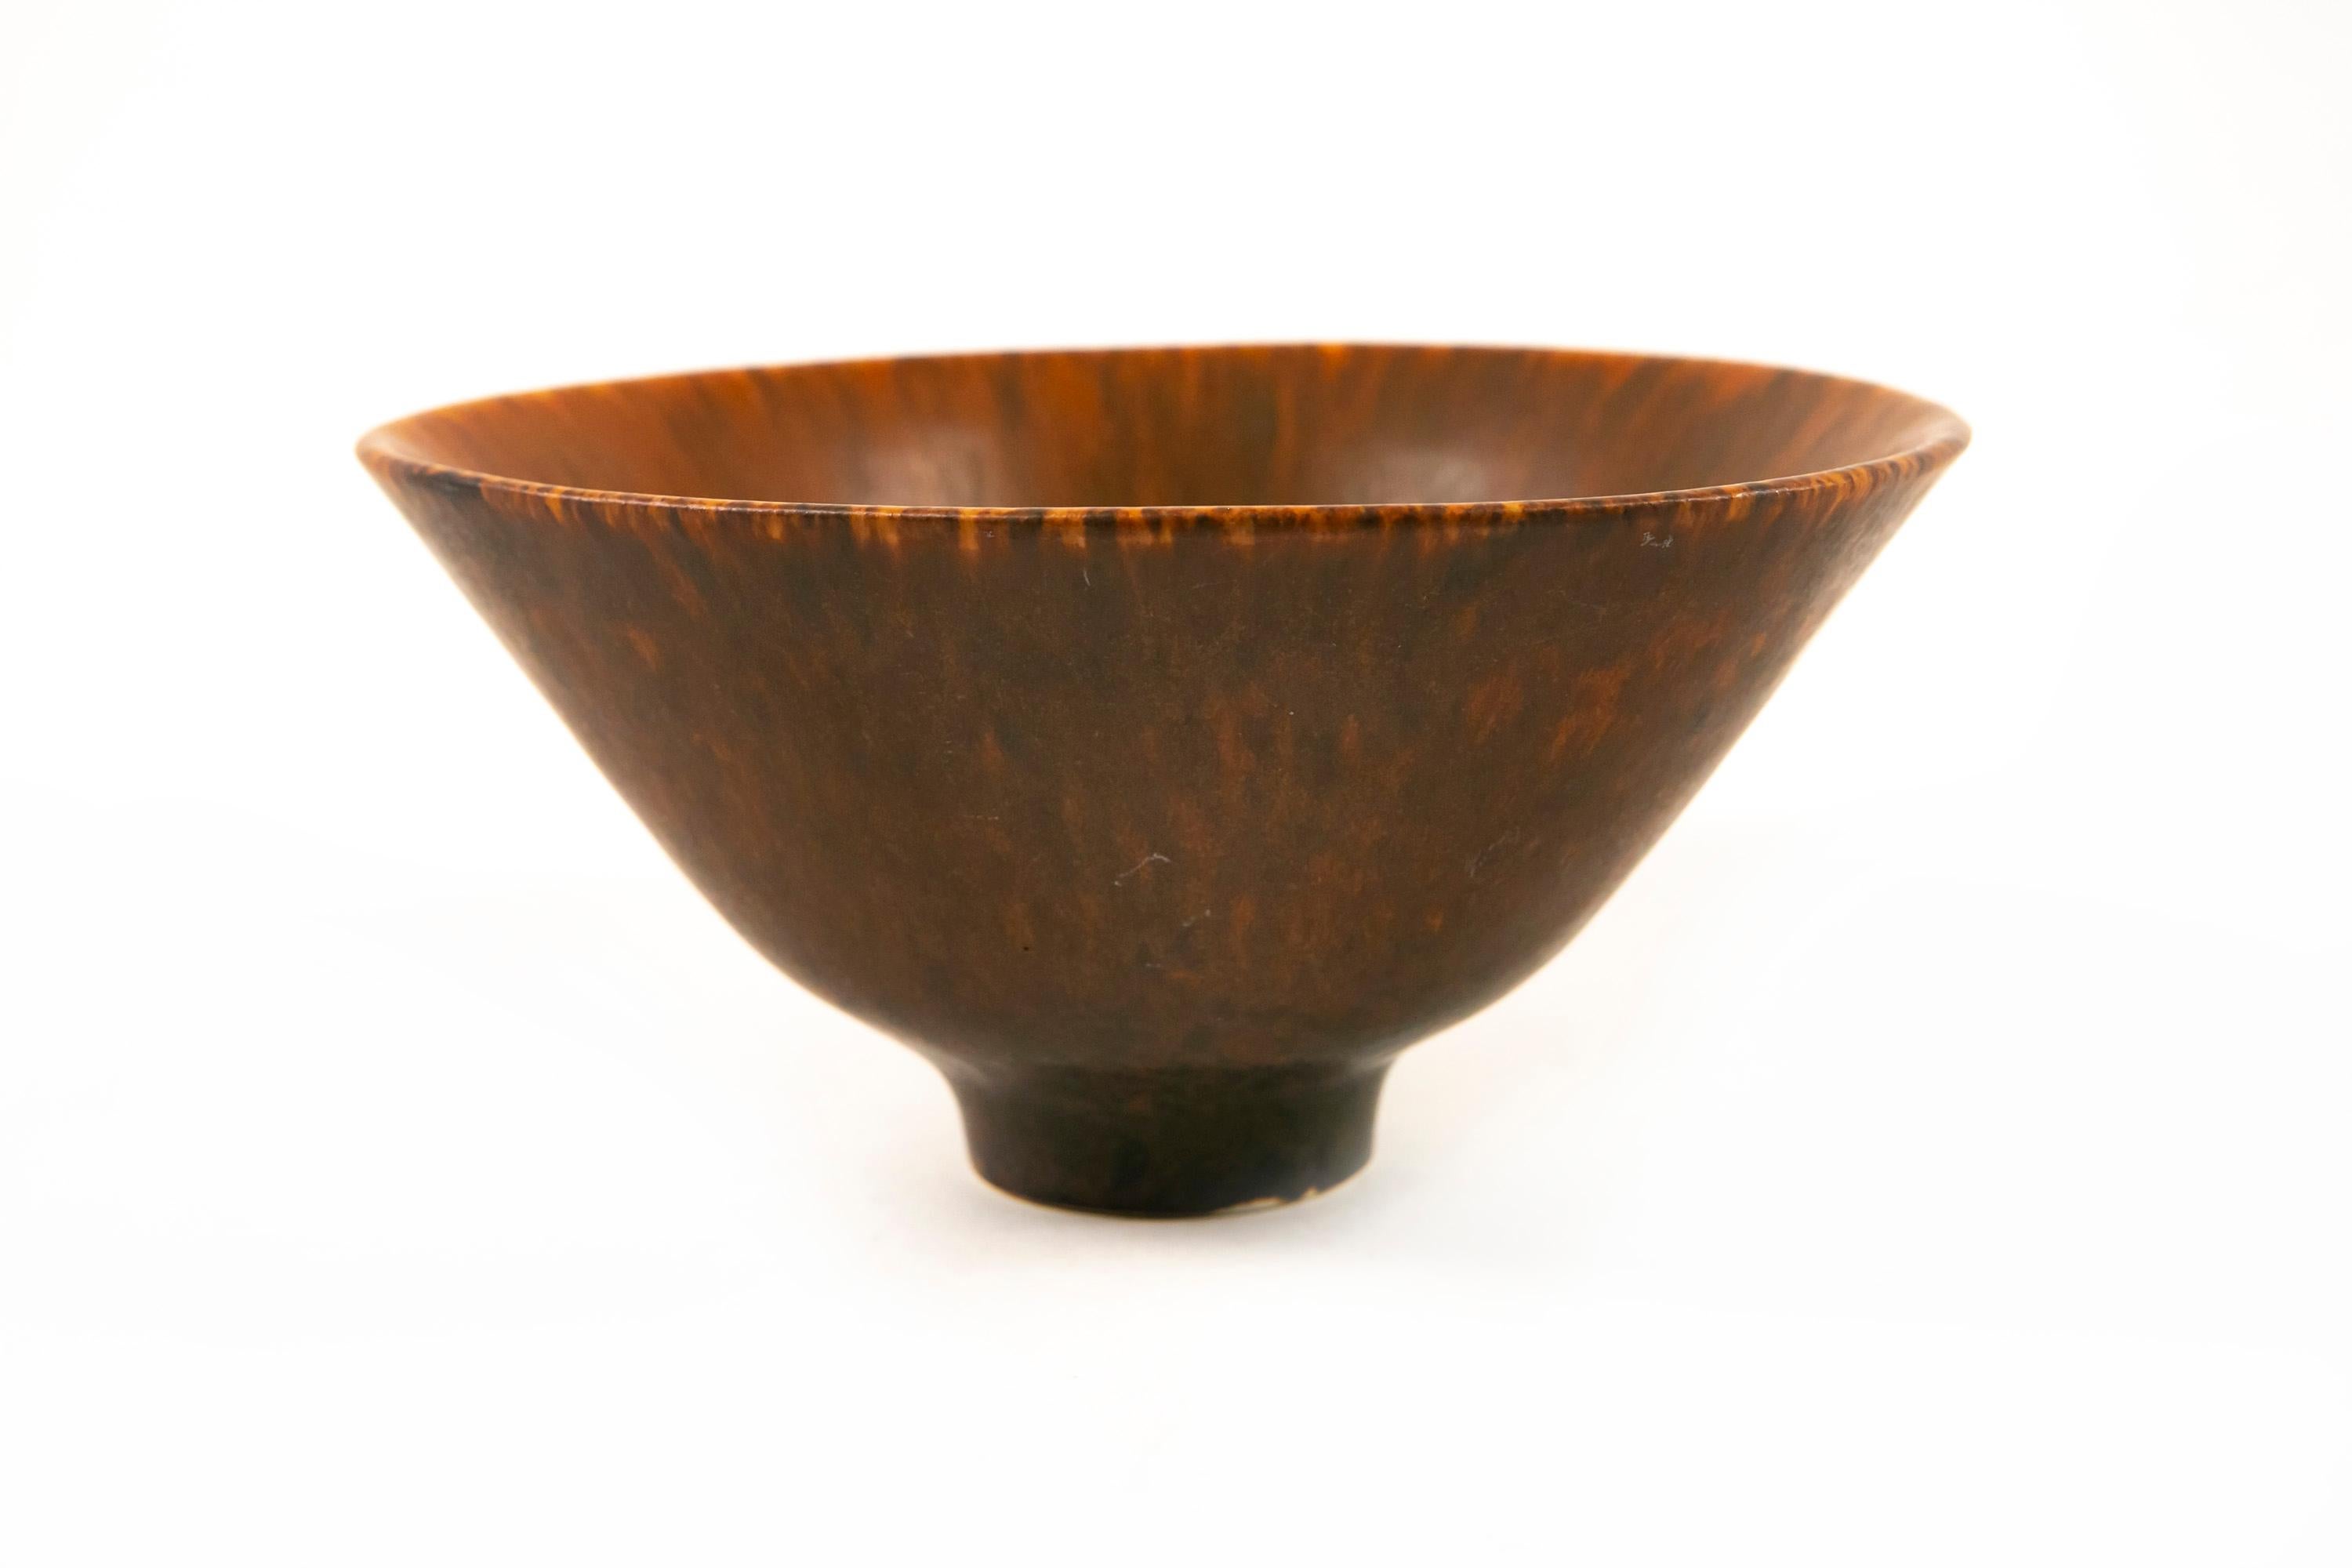 Hand-Crafted Carl Harry Stalhane Bowl, Matte Rust Red Hares Fur Glaze Rorstrand Sweden, 1950s For Sale